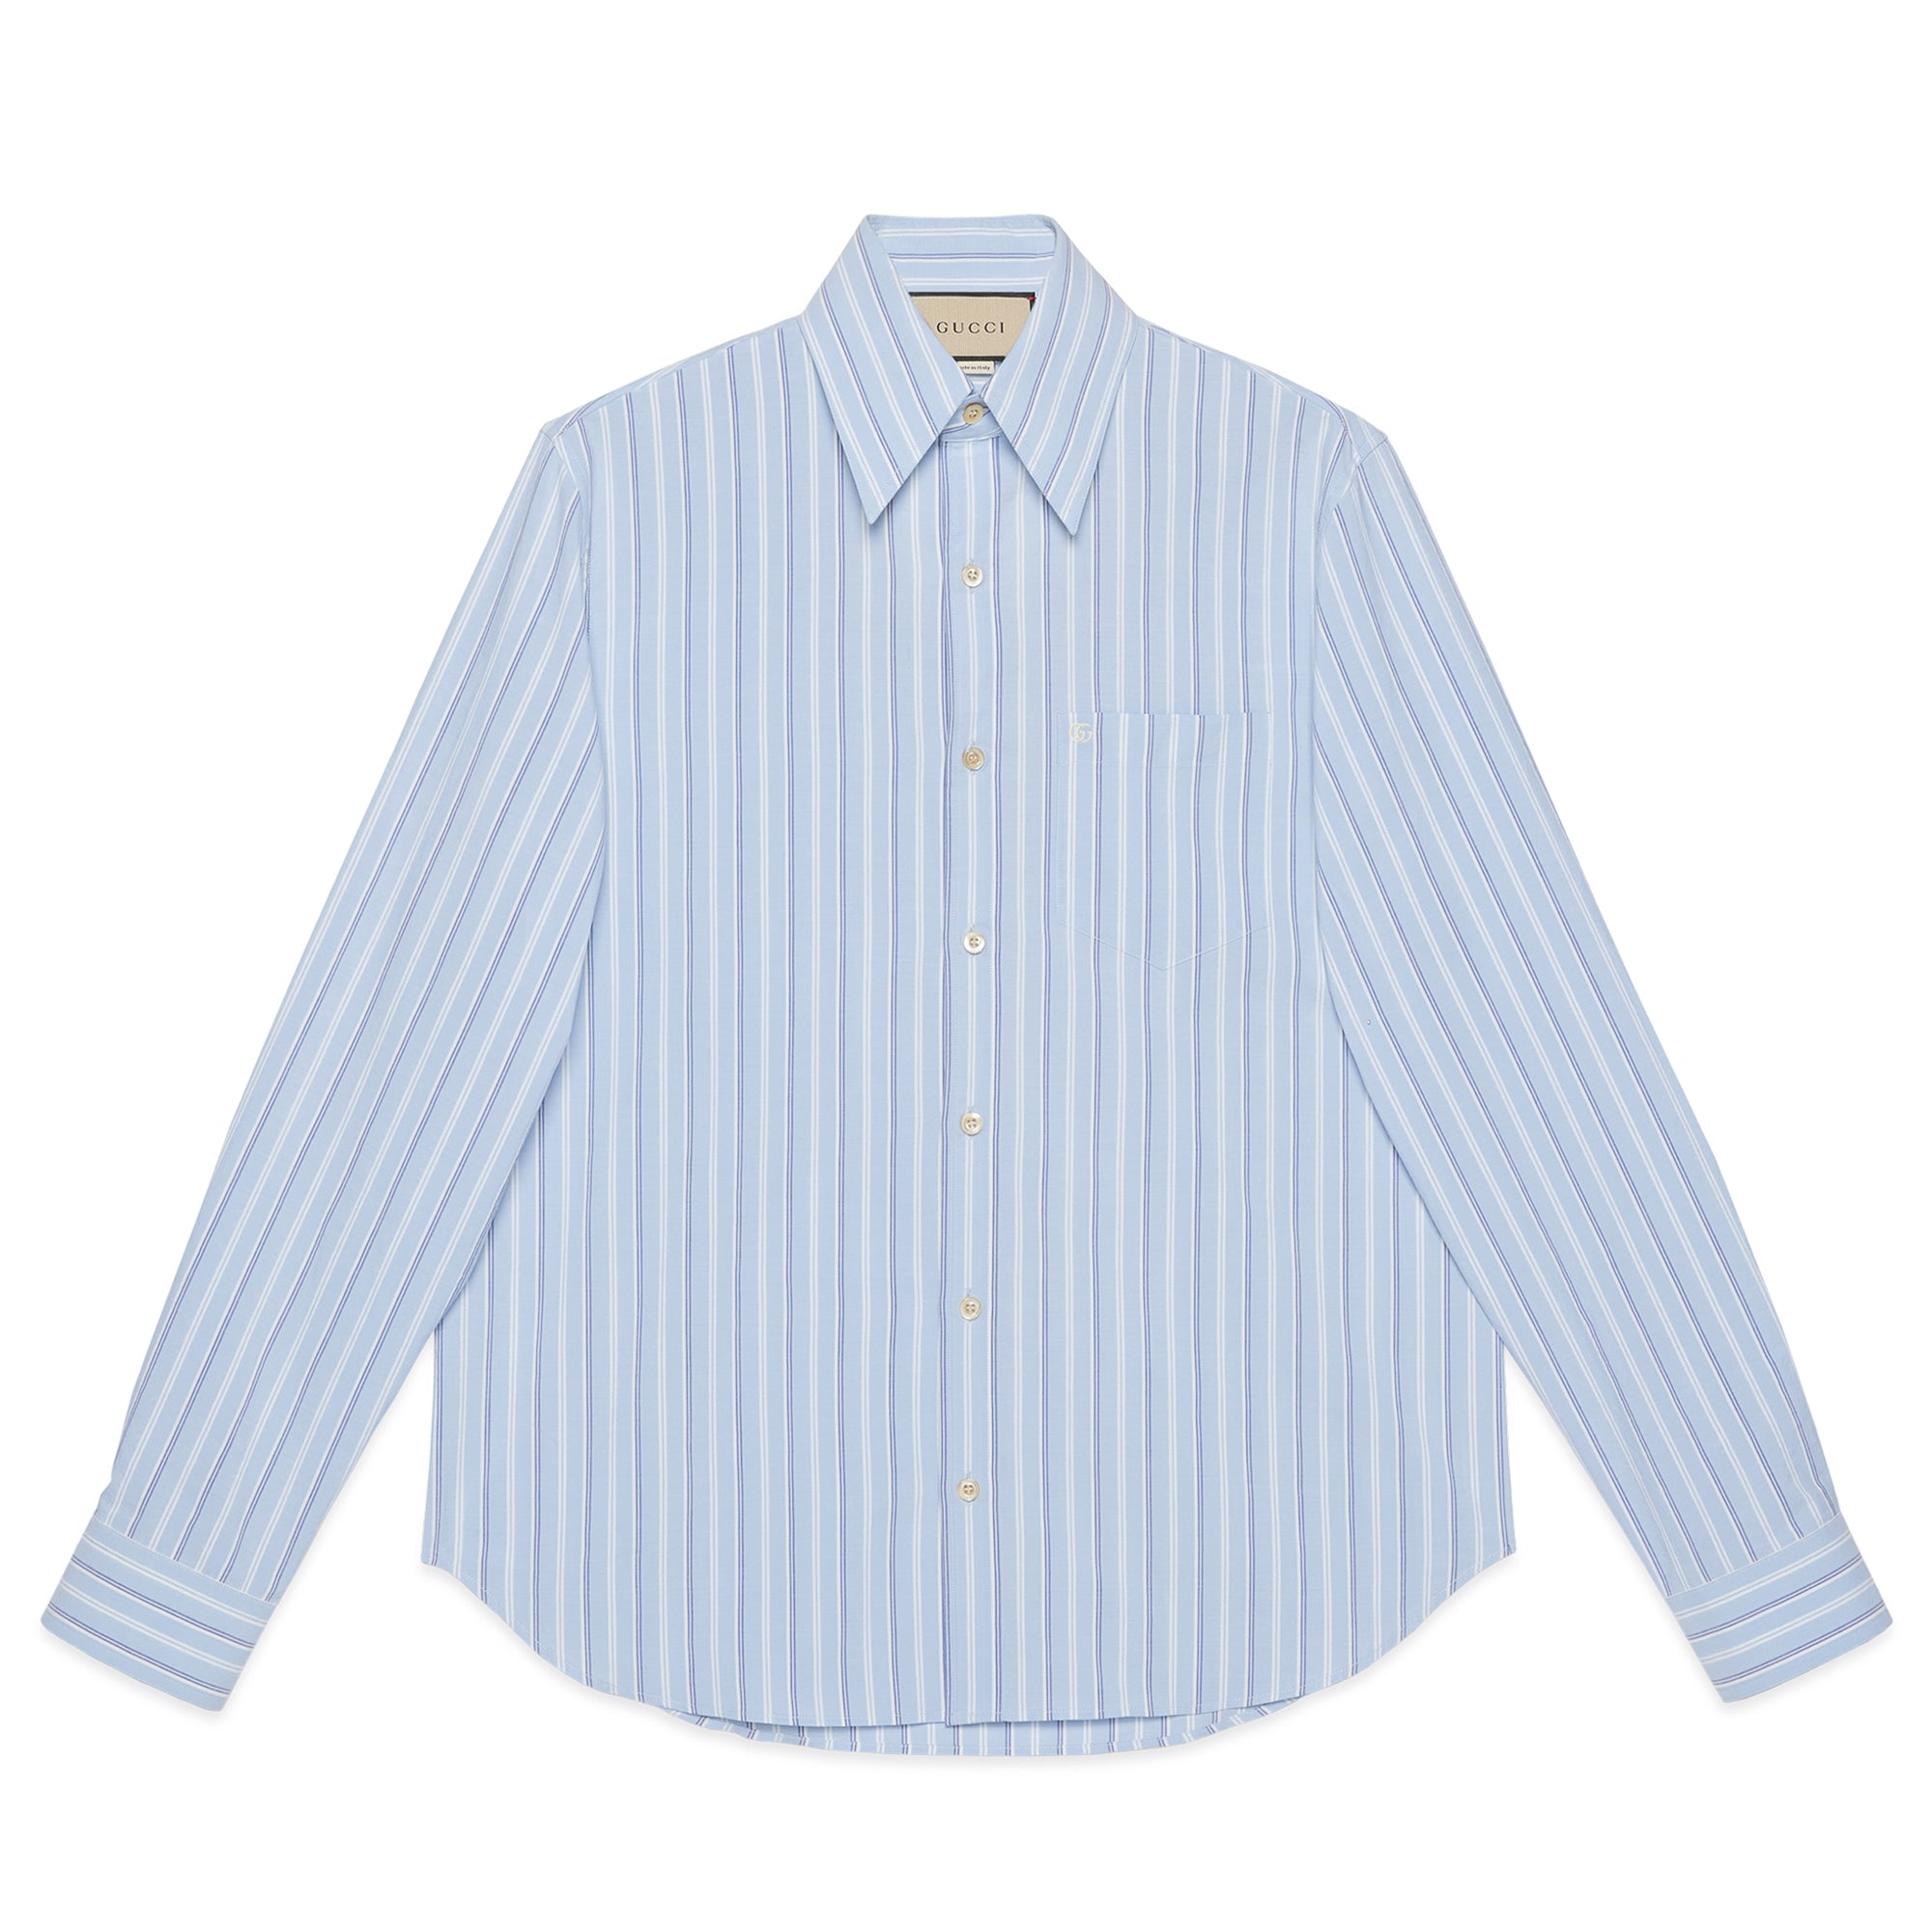 Gucci - Men’s Striped Cotton Embroidered Shirt - (Light Blue) view 1